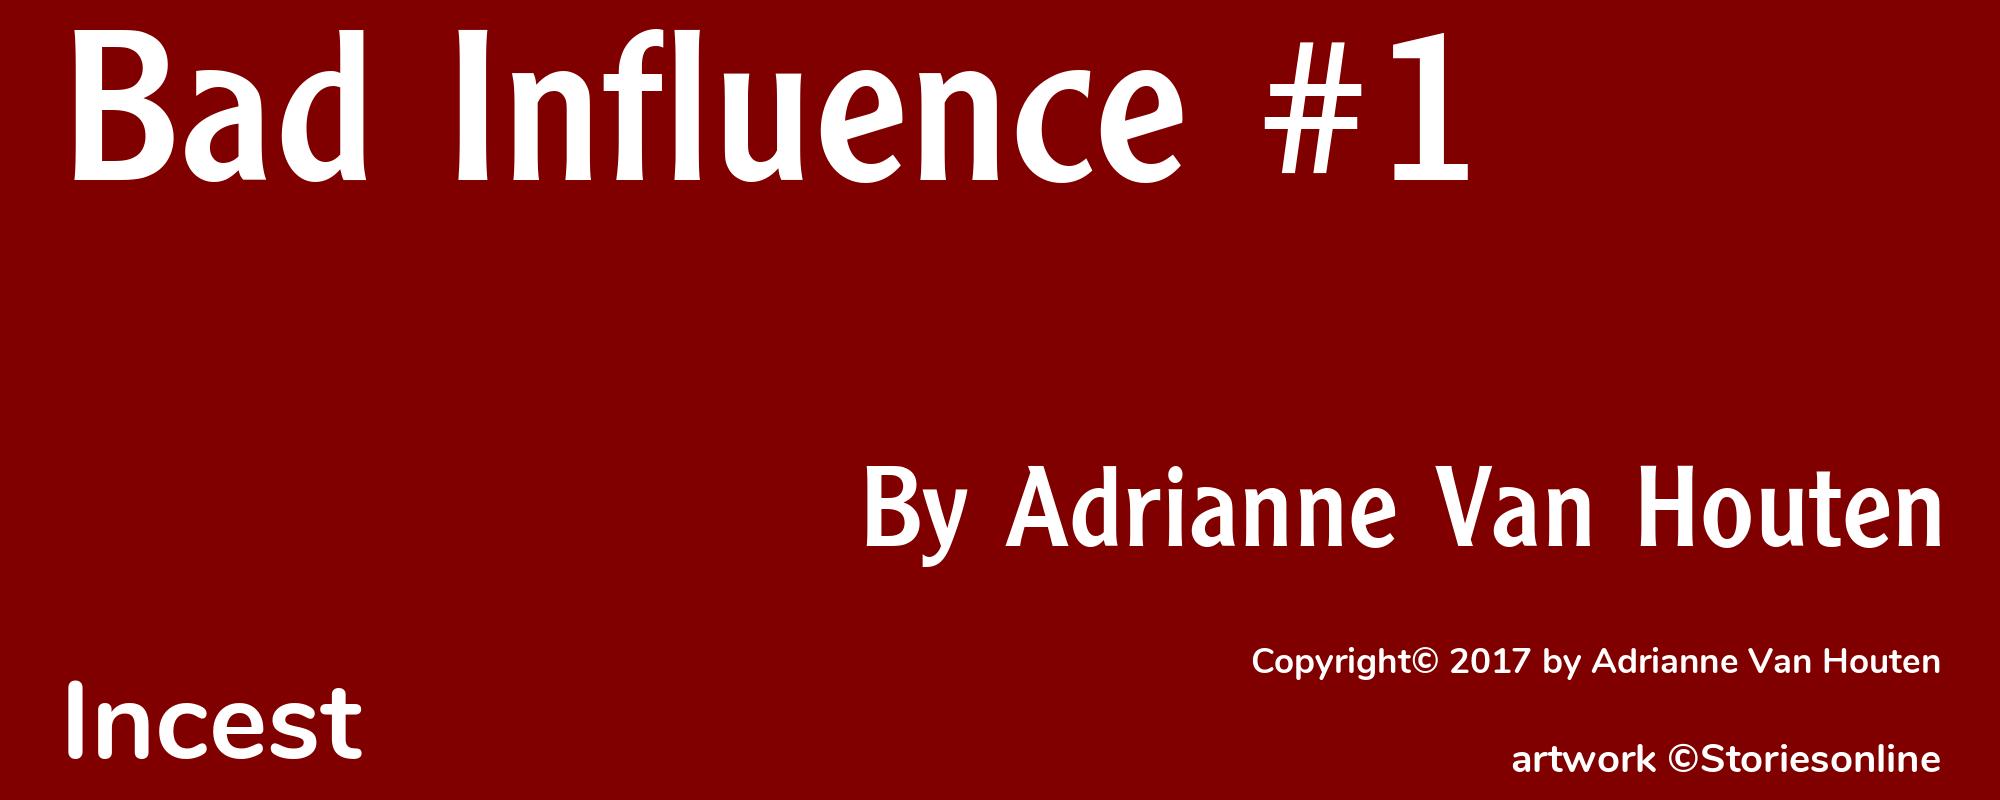 Bad Influence #1 - Cover